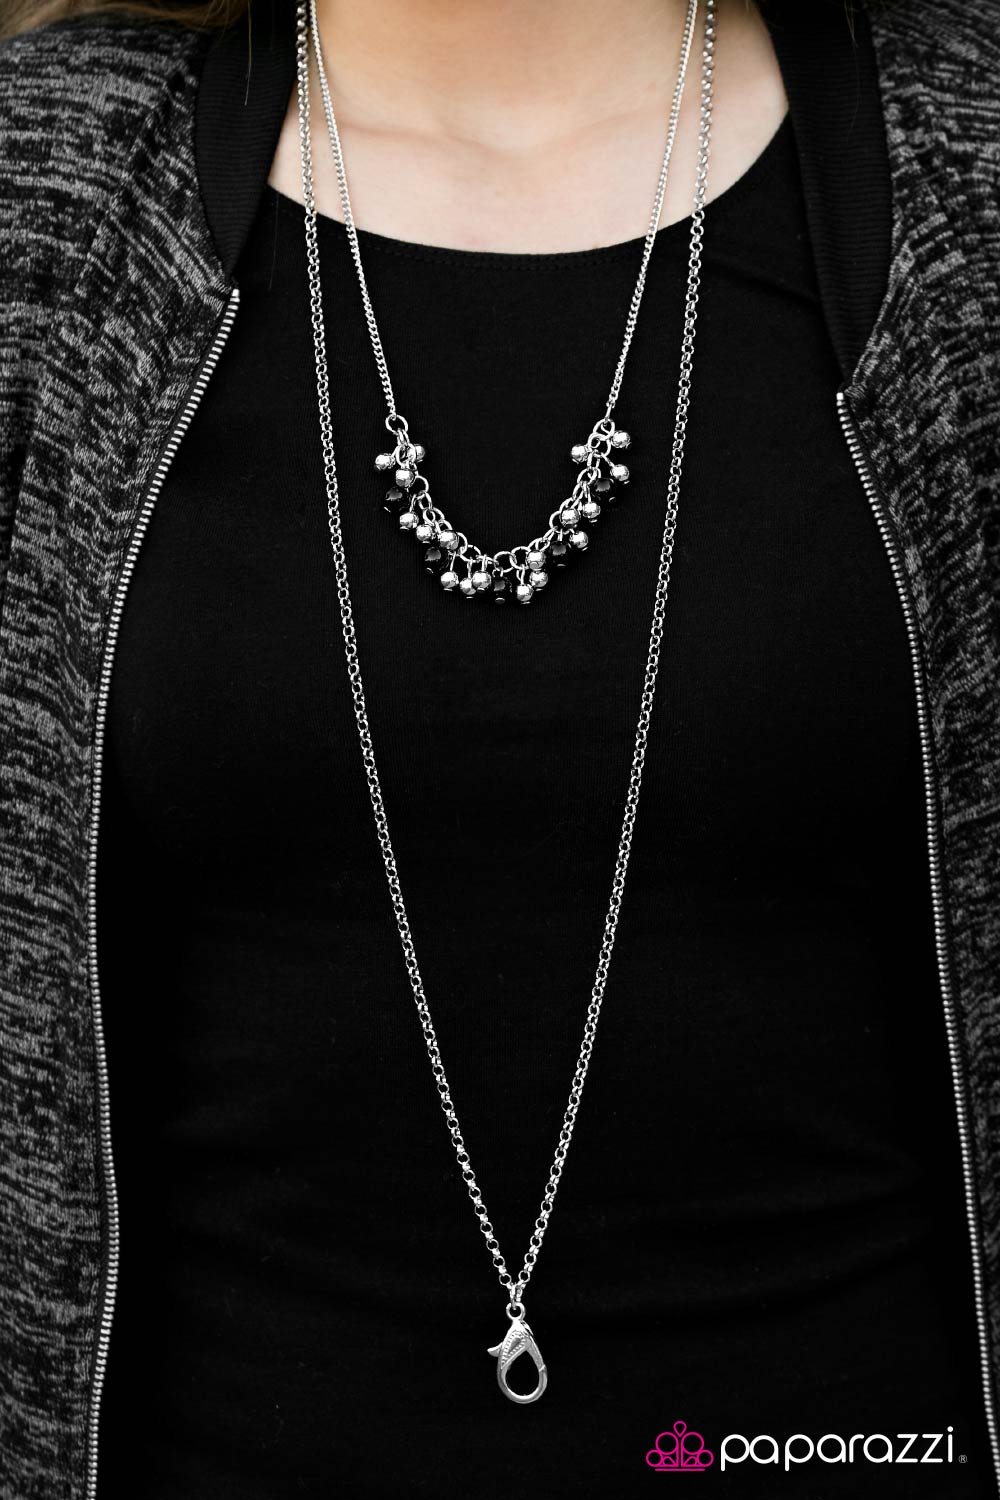 Runway Sparkle Black Necklace - Paparazzi Accessories-on model - CarasShop.com - $5 Jewelry by Cara Jewels